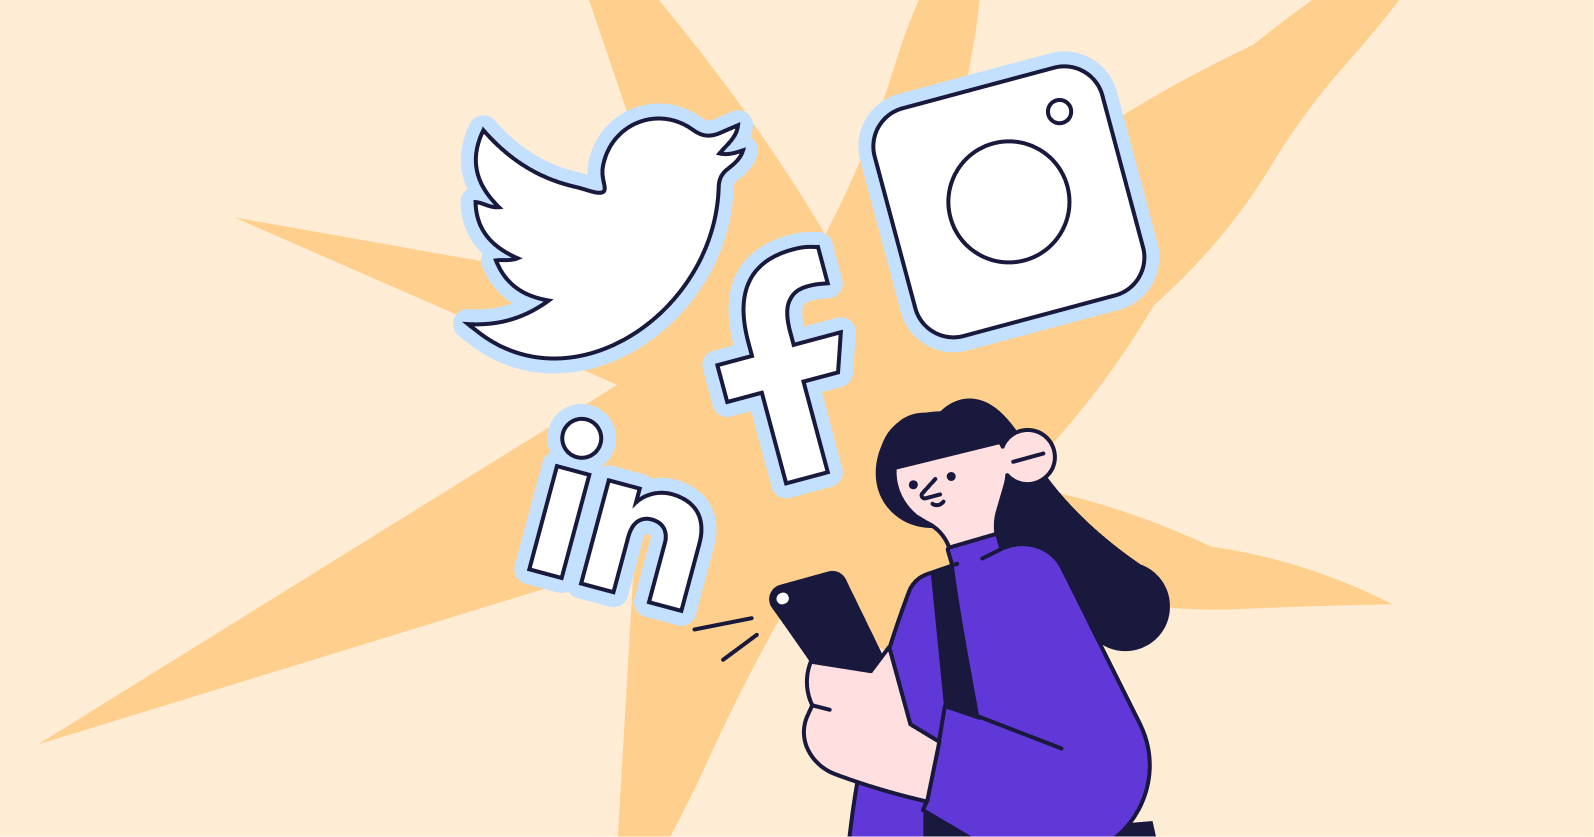 Illustration of a person on their phone using social media.